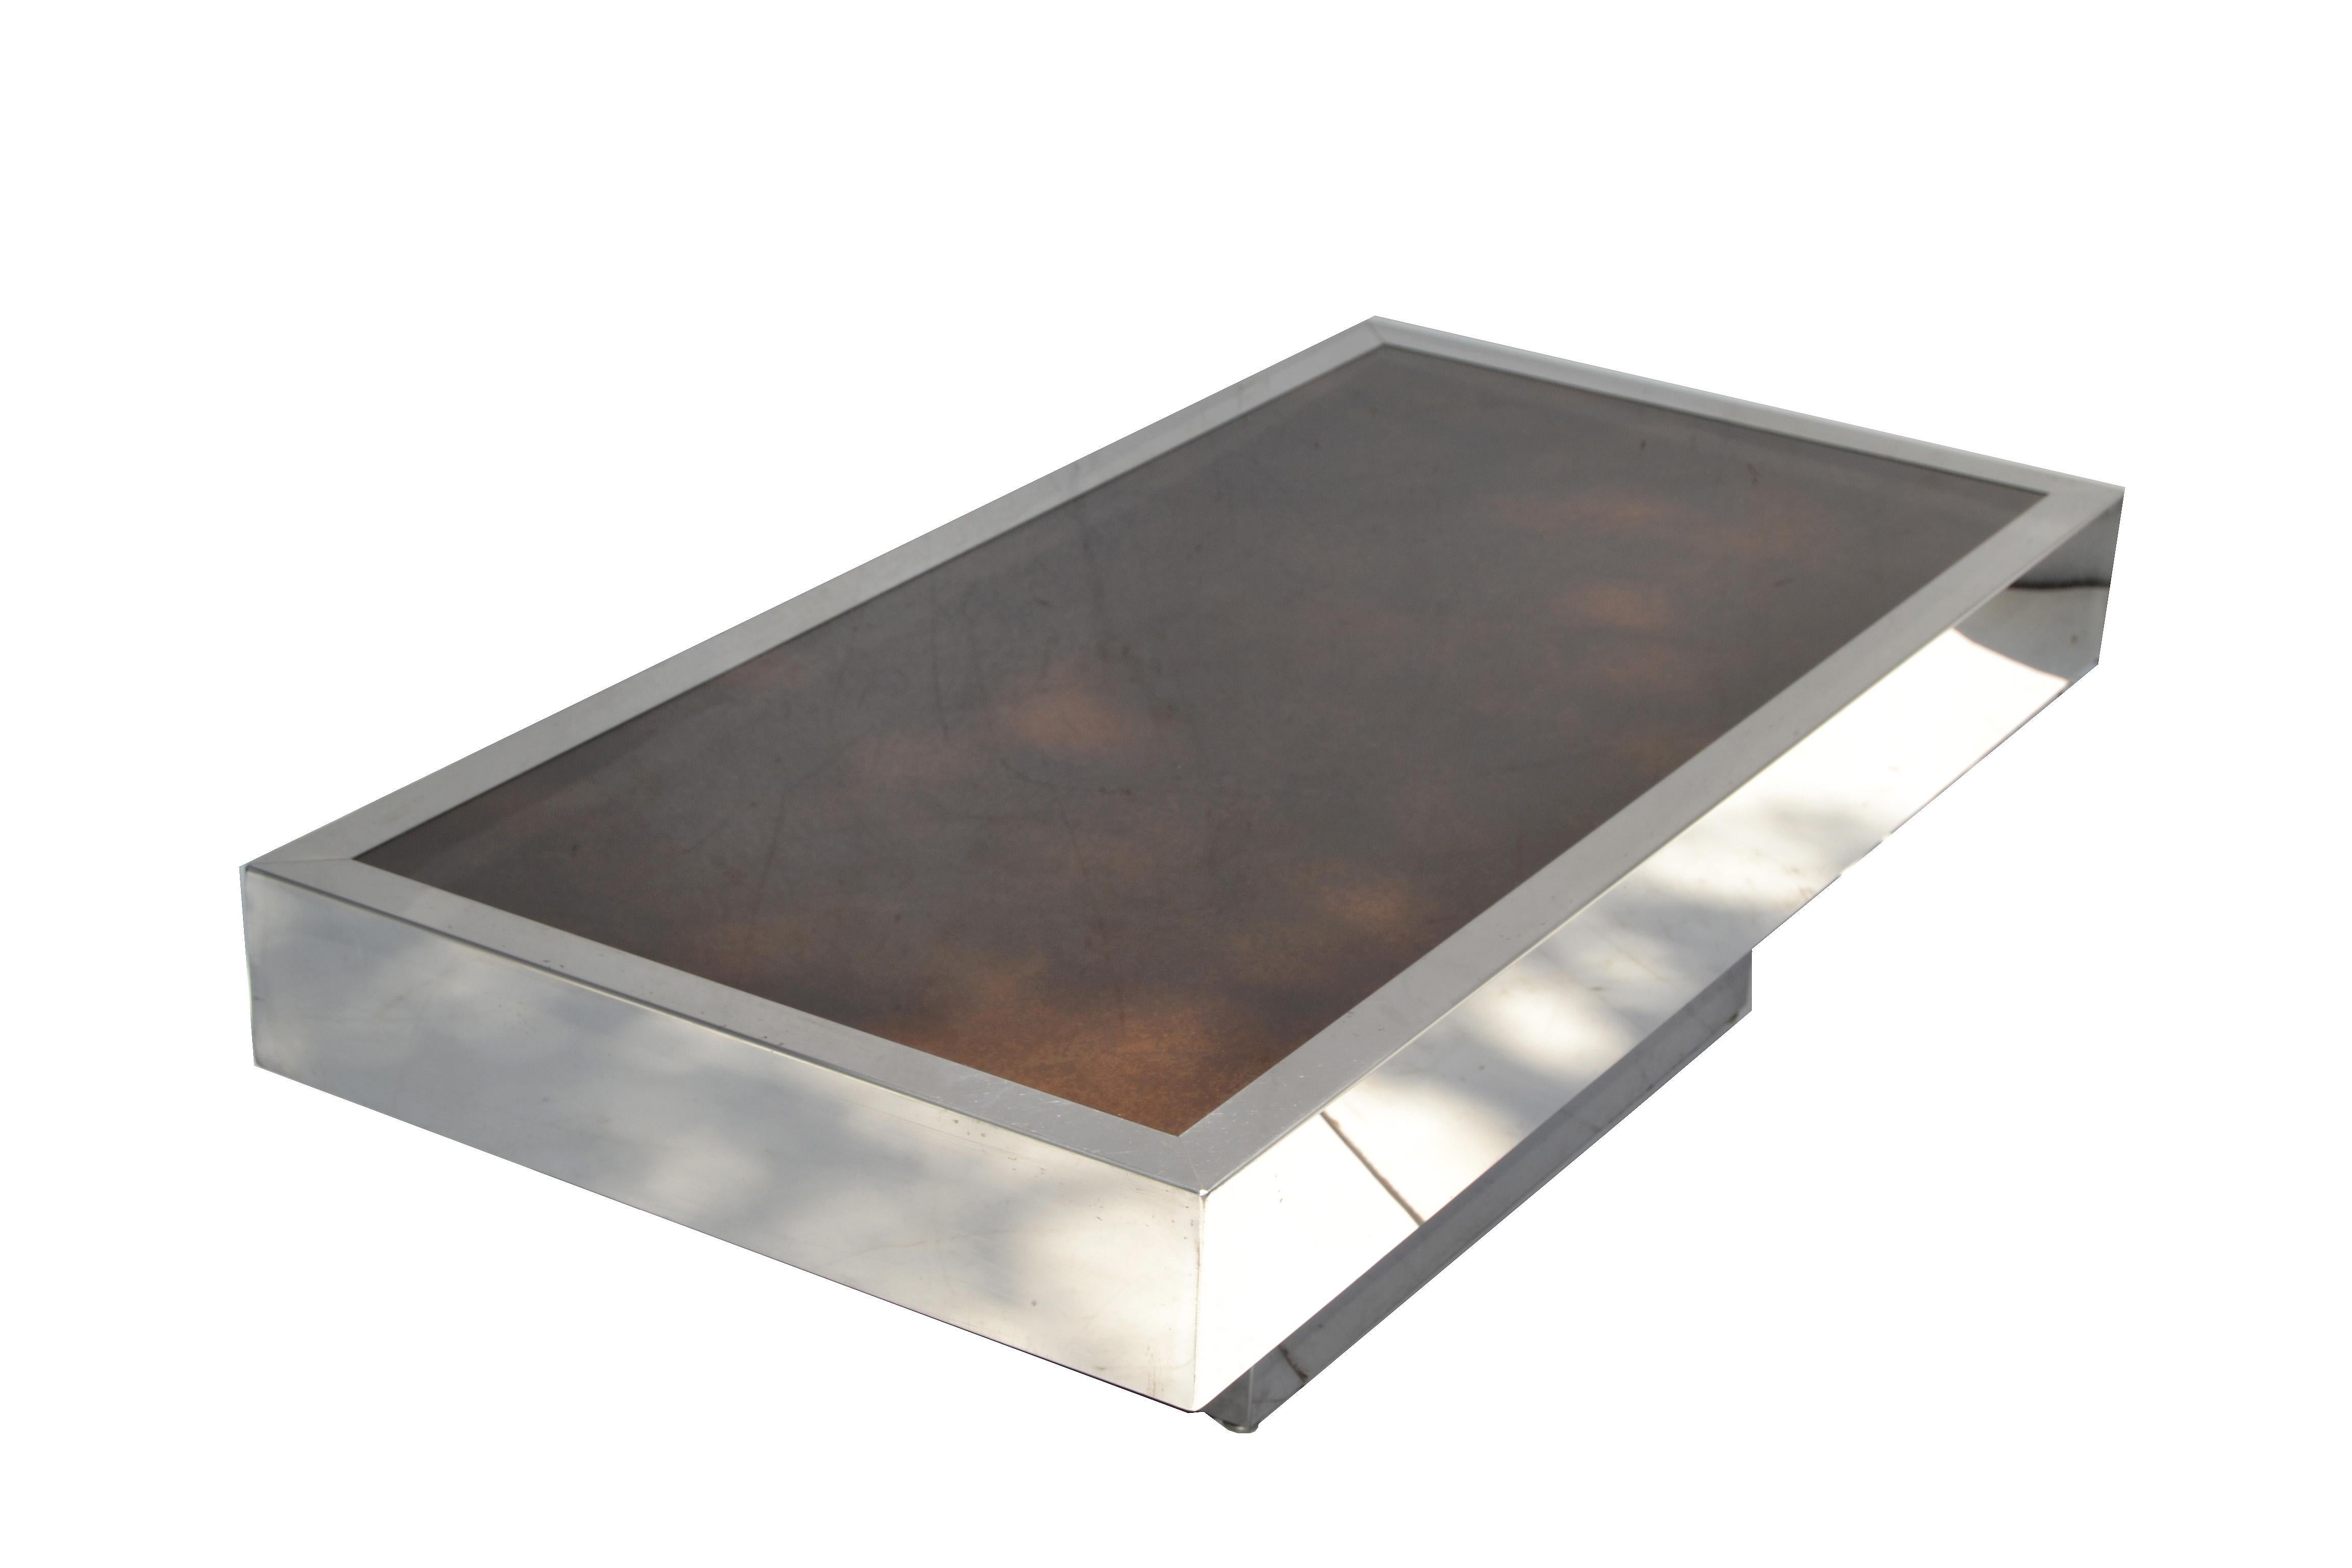 Italian Willy Rizzo Style Chrome Steel & Brown Cloudy Glass Coffee Table, 1970 For Sale 8